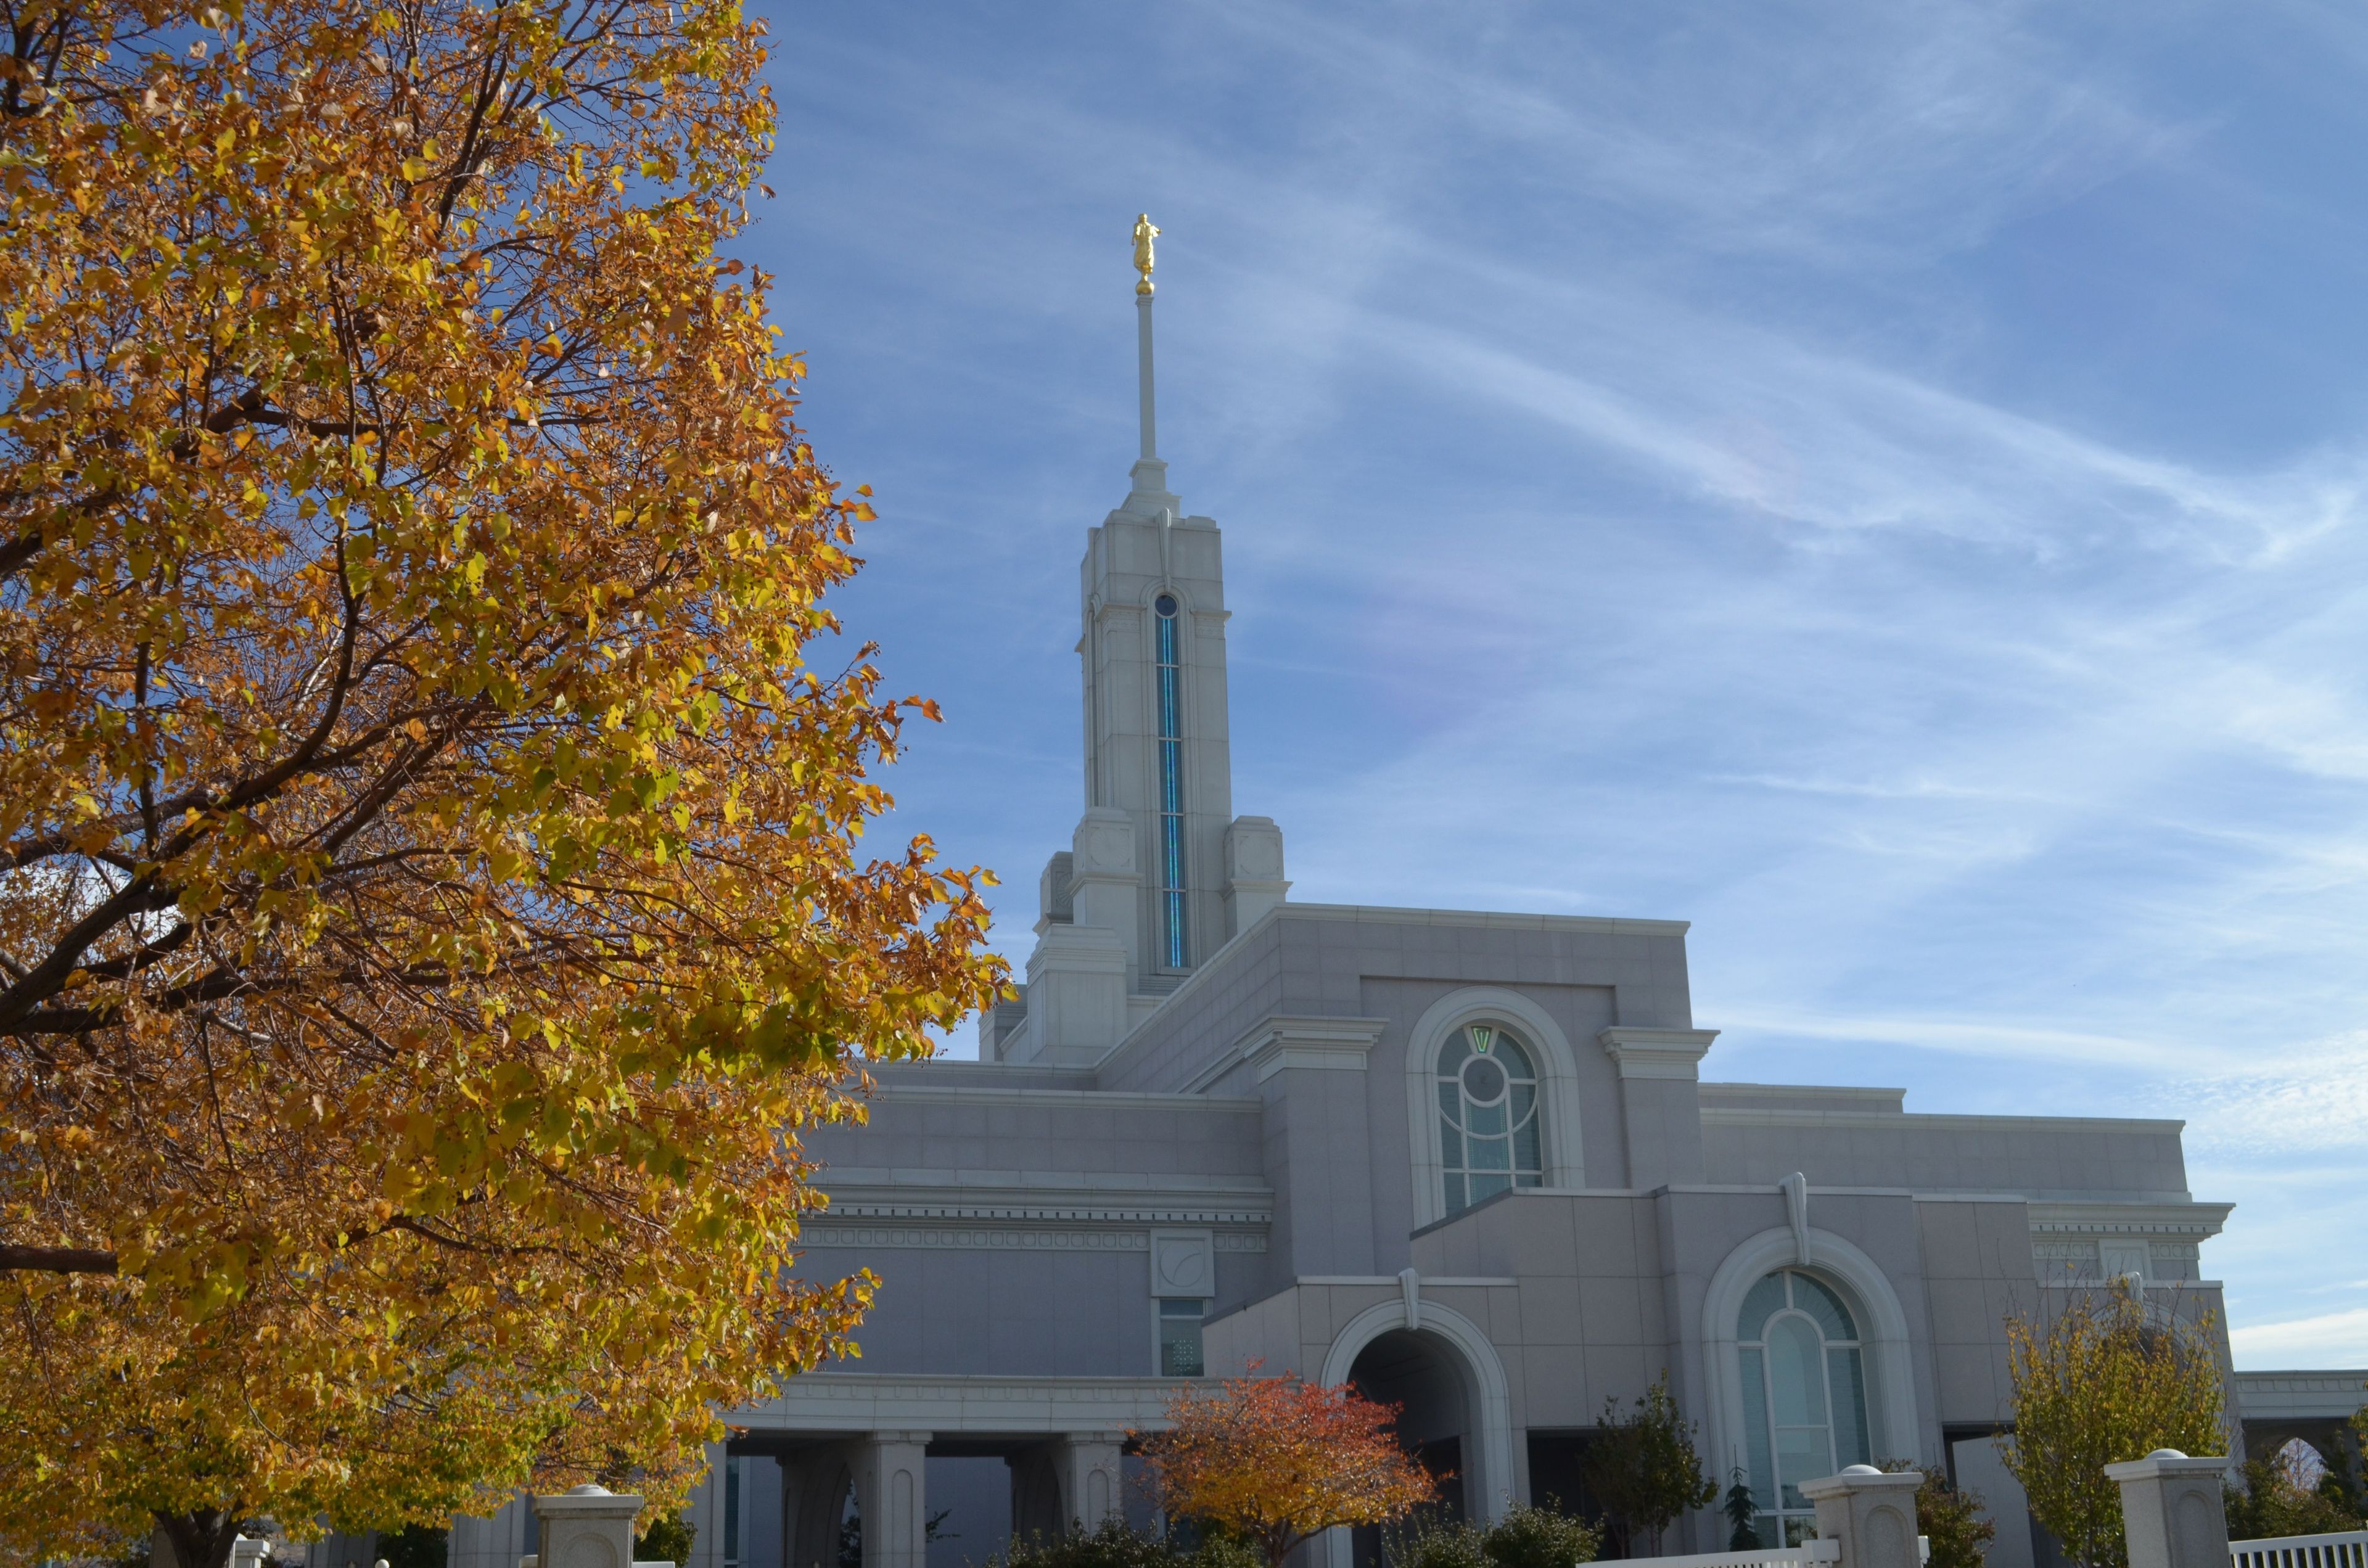 The Mount Timpanogos Utah Temple, including entrance and scenery.